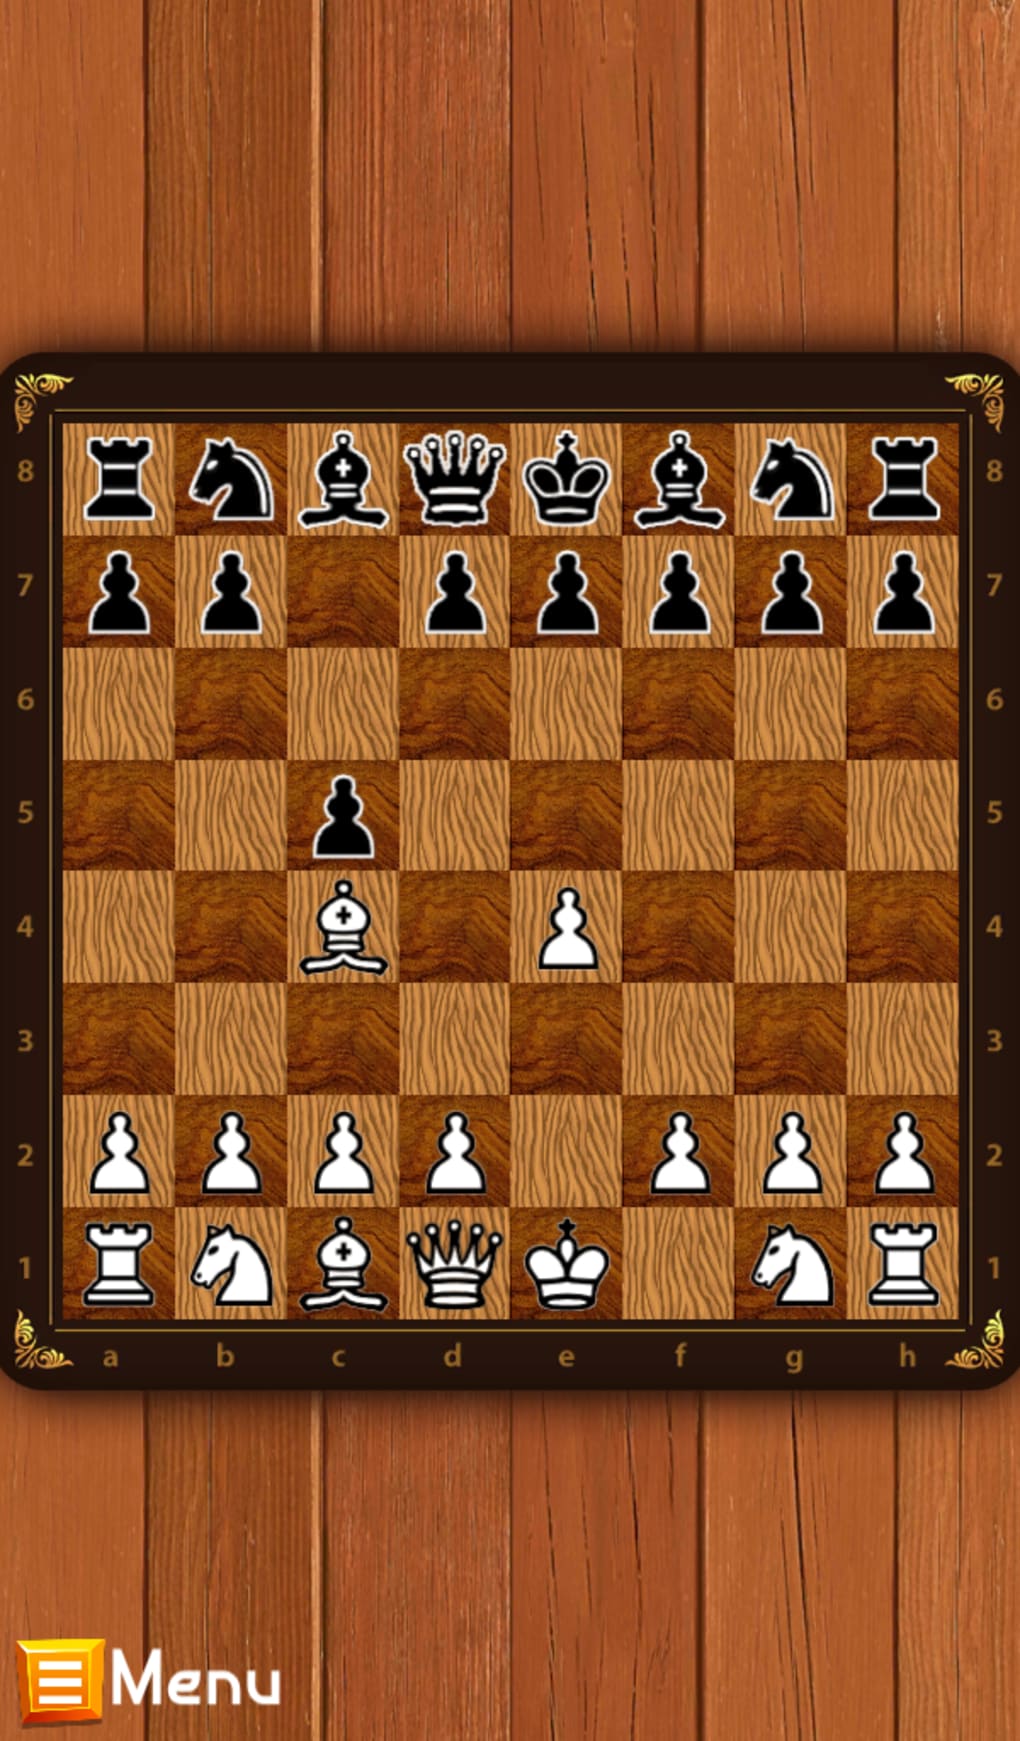 Casual Chess Unblocked